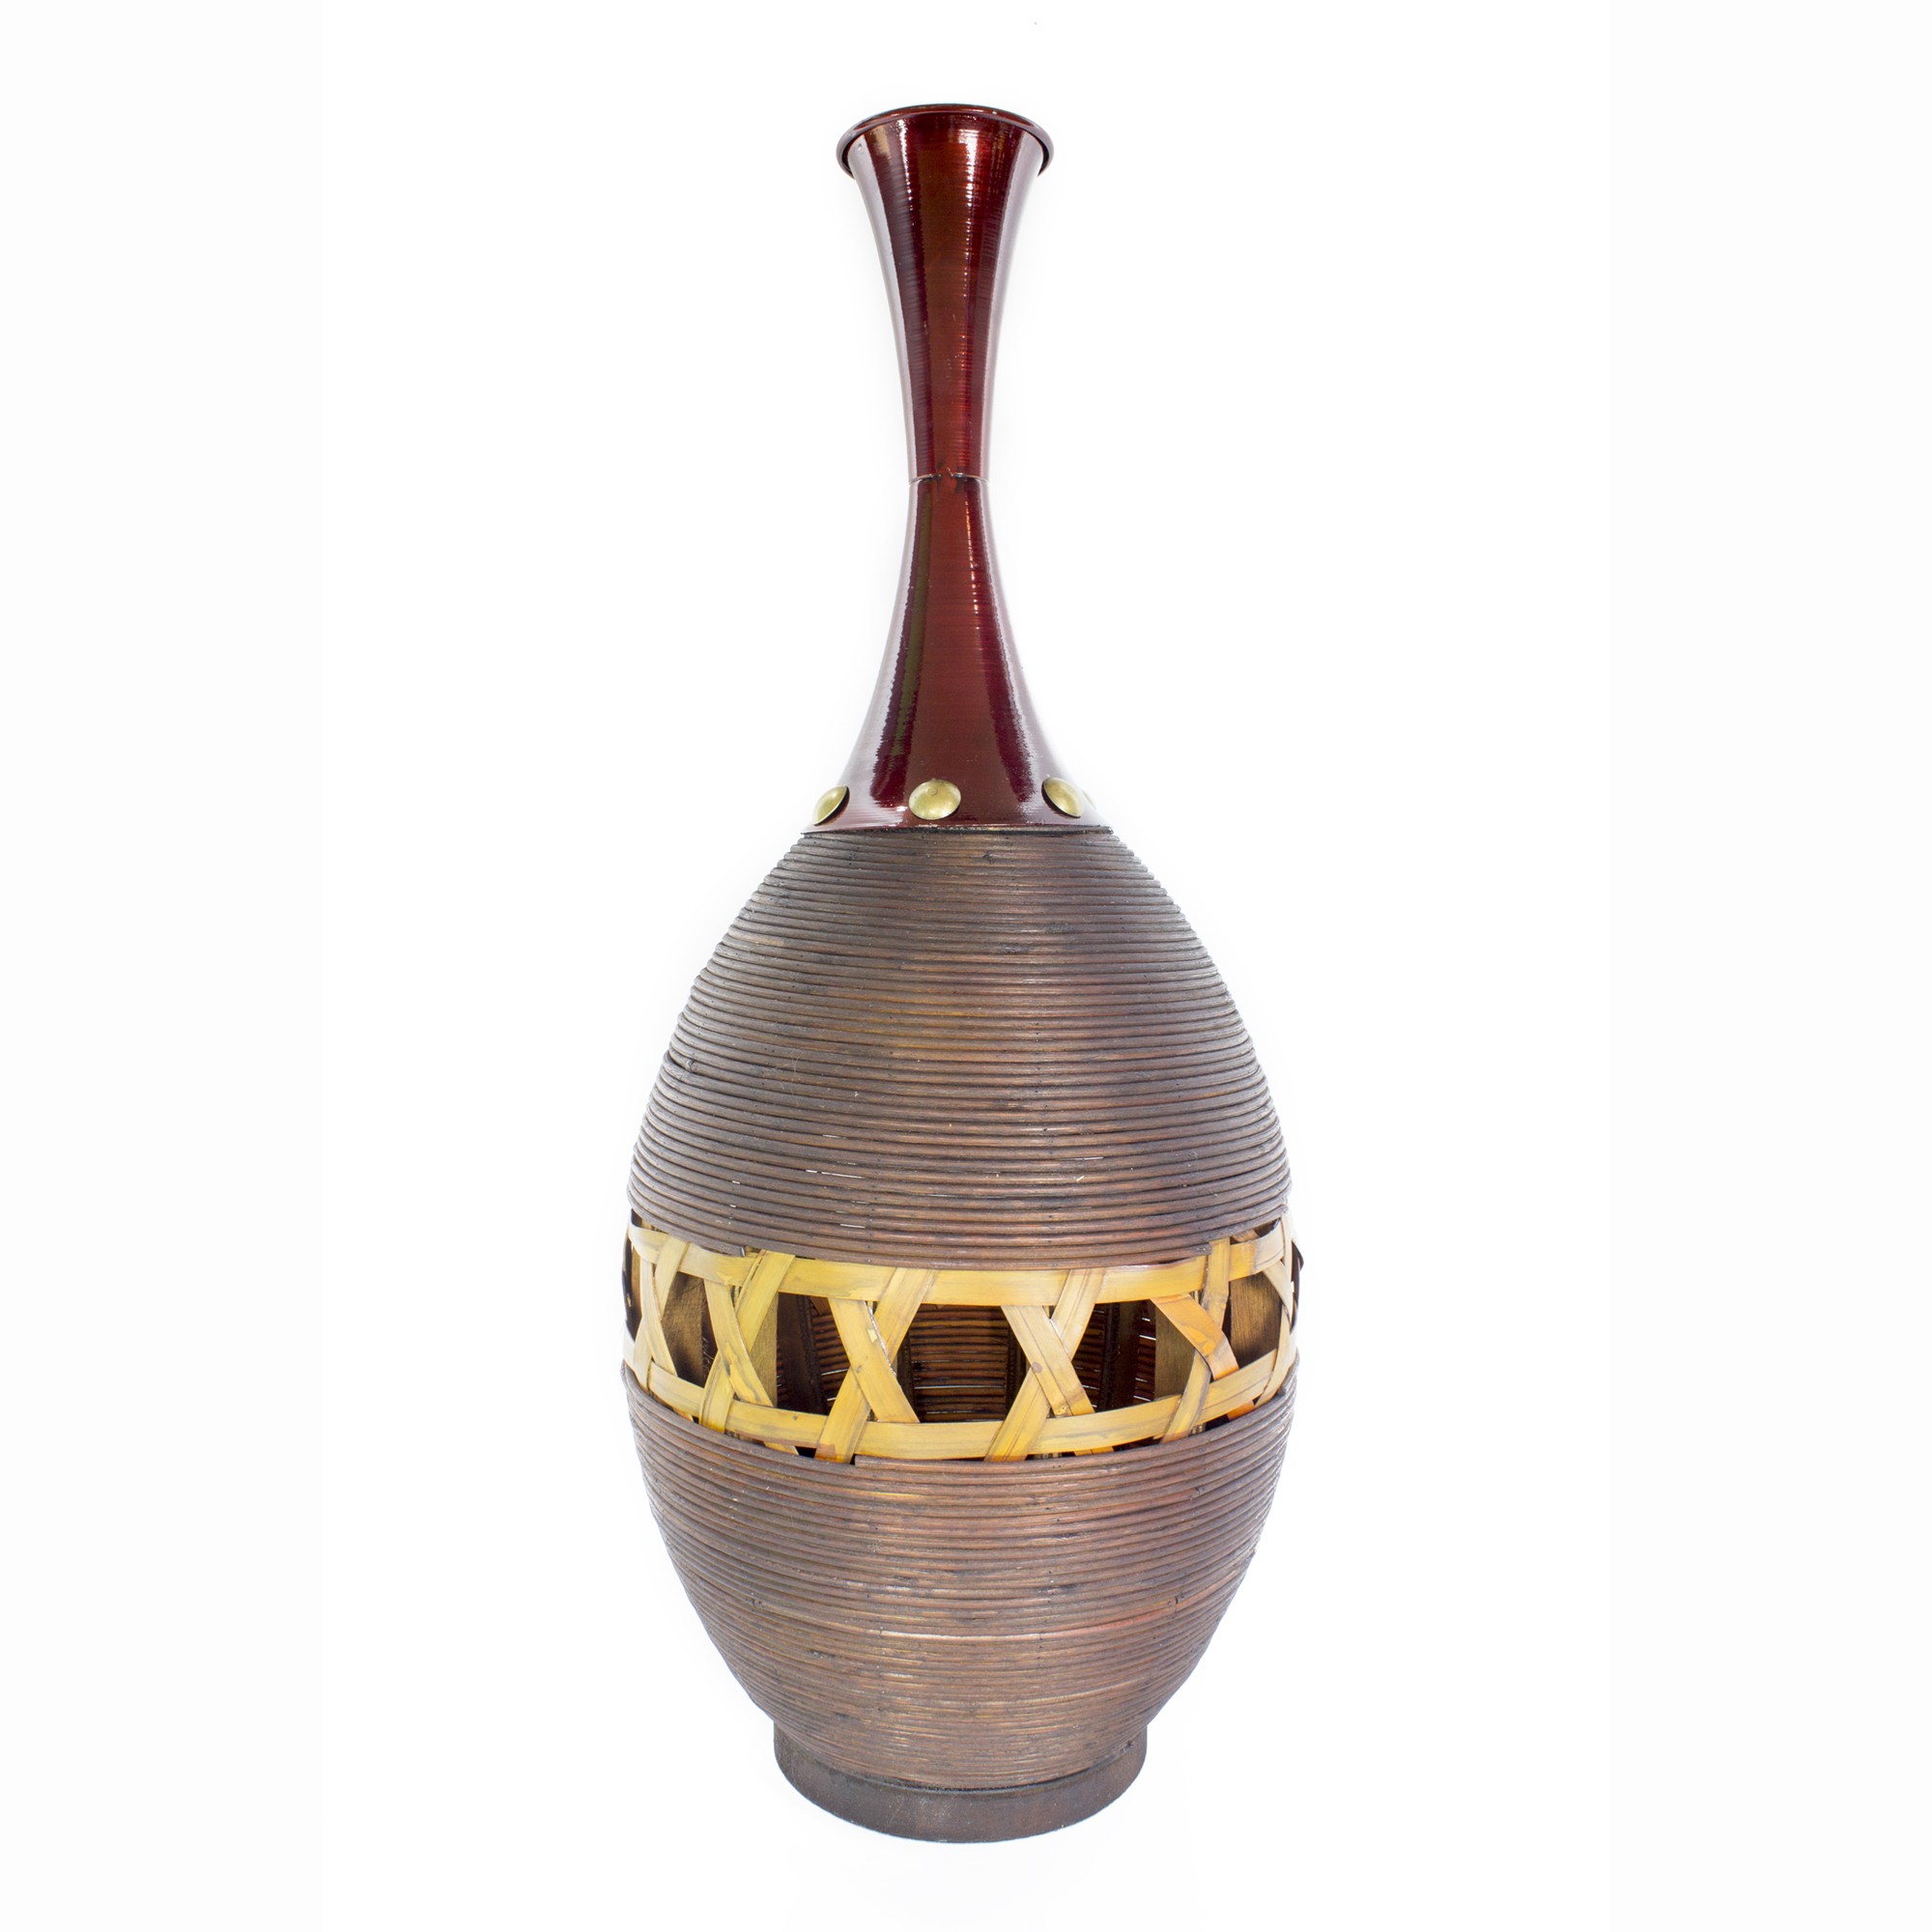 Decorative Copper Red and Gold Spun Bamboo with Metal Vase